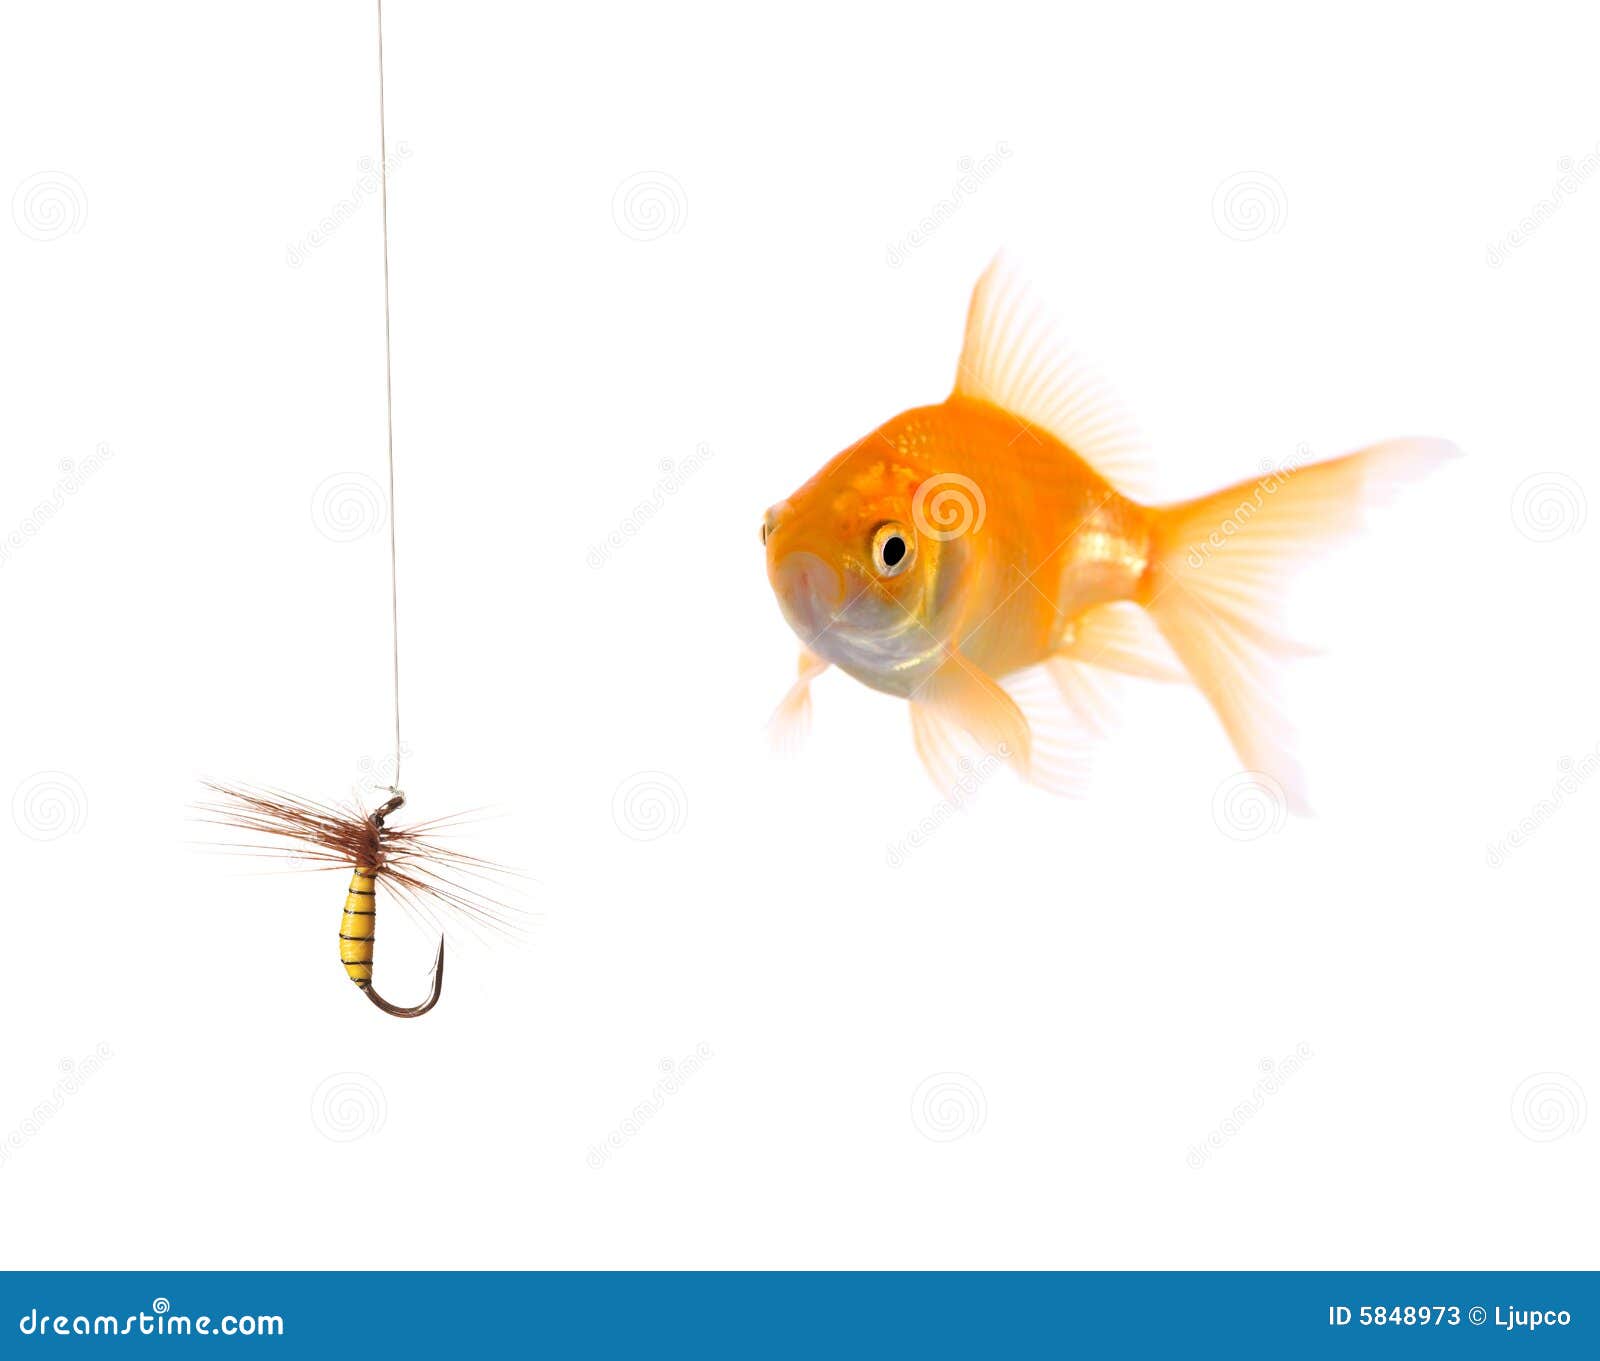 Golden Fish And A Fishing Bait Stock Photos - Image: 5848973